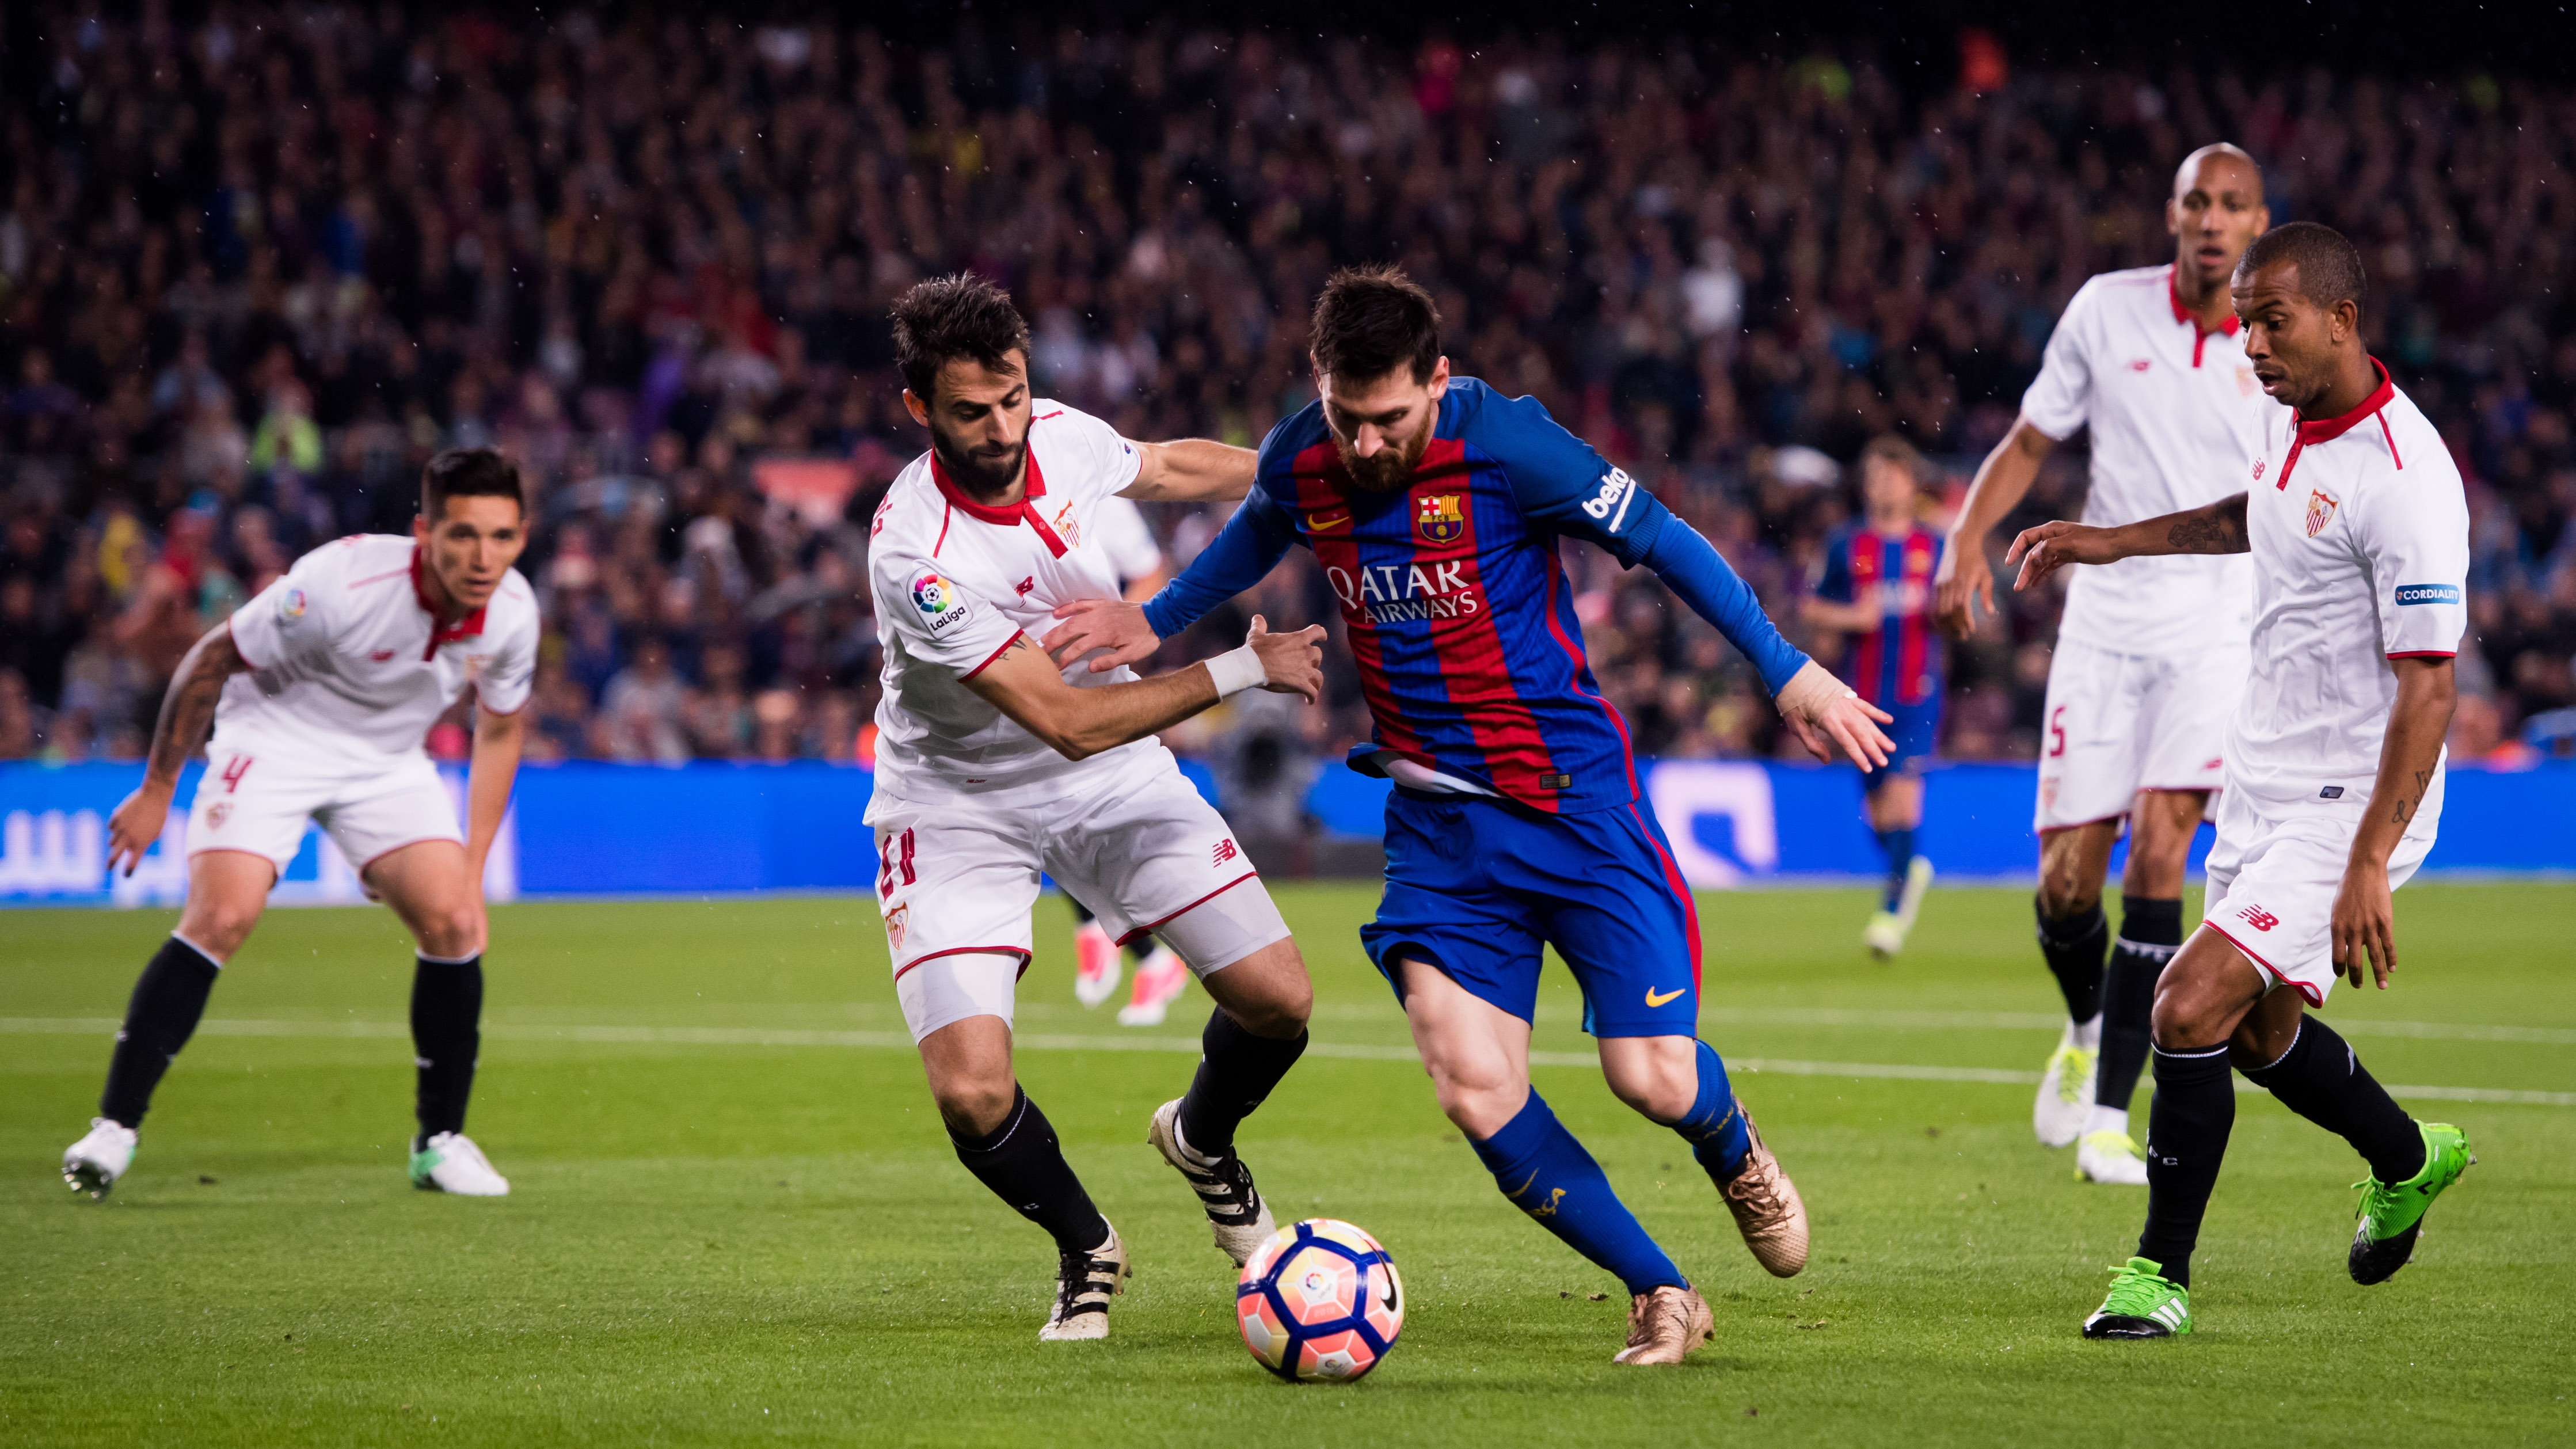 BARCELONA, SPAIN - APRIL 05:  Lionel Messi (C) of FC Barcelona fights for the ball with Nico Pareja (L) of Sevilla FC during the La Liga match between FC Barcelona and Sevilla FC at Camp Nou stadium on April 5, 2017 in Barcelona, Spain.  (Photo by Alex Caparros/Getty Images)